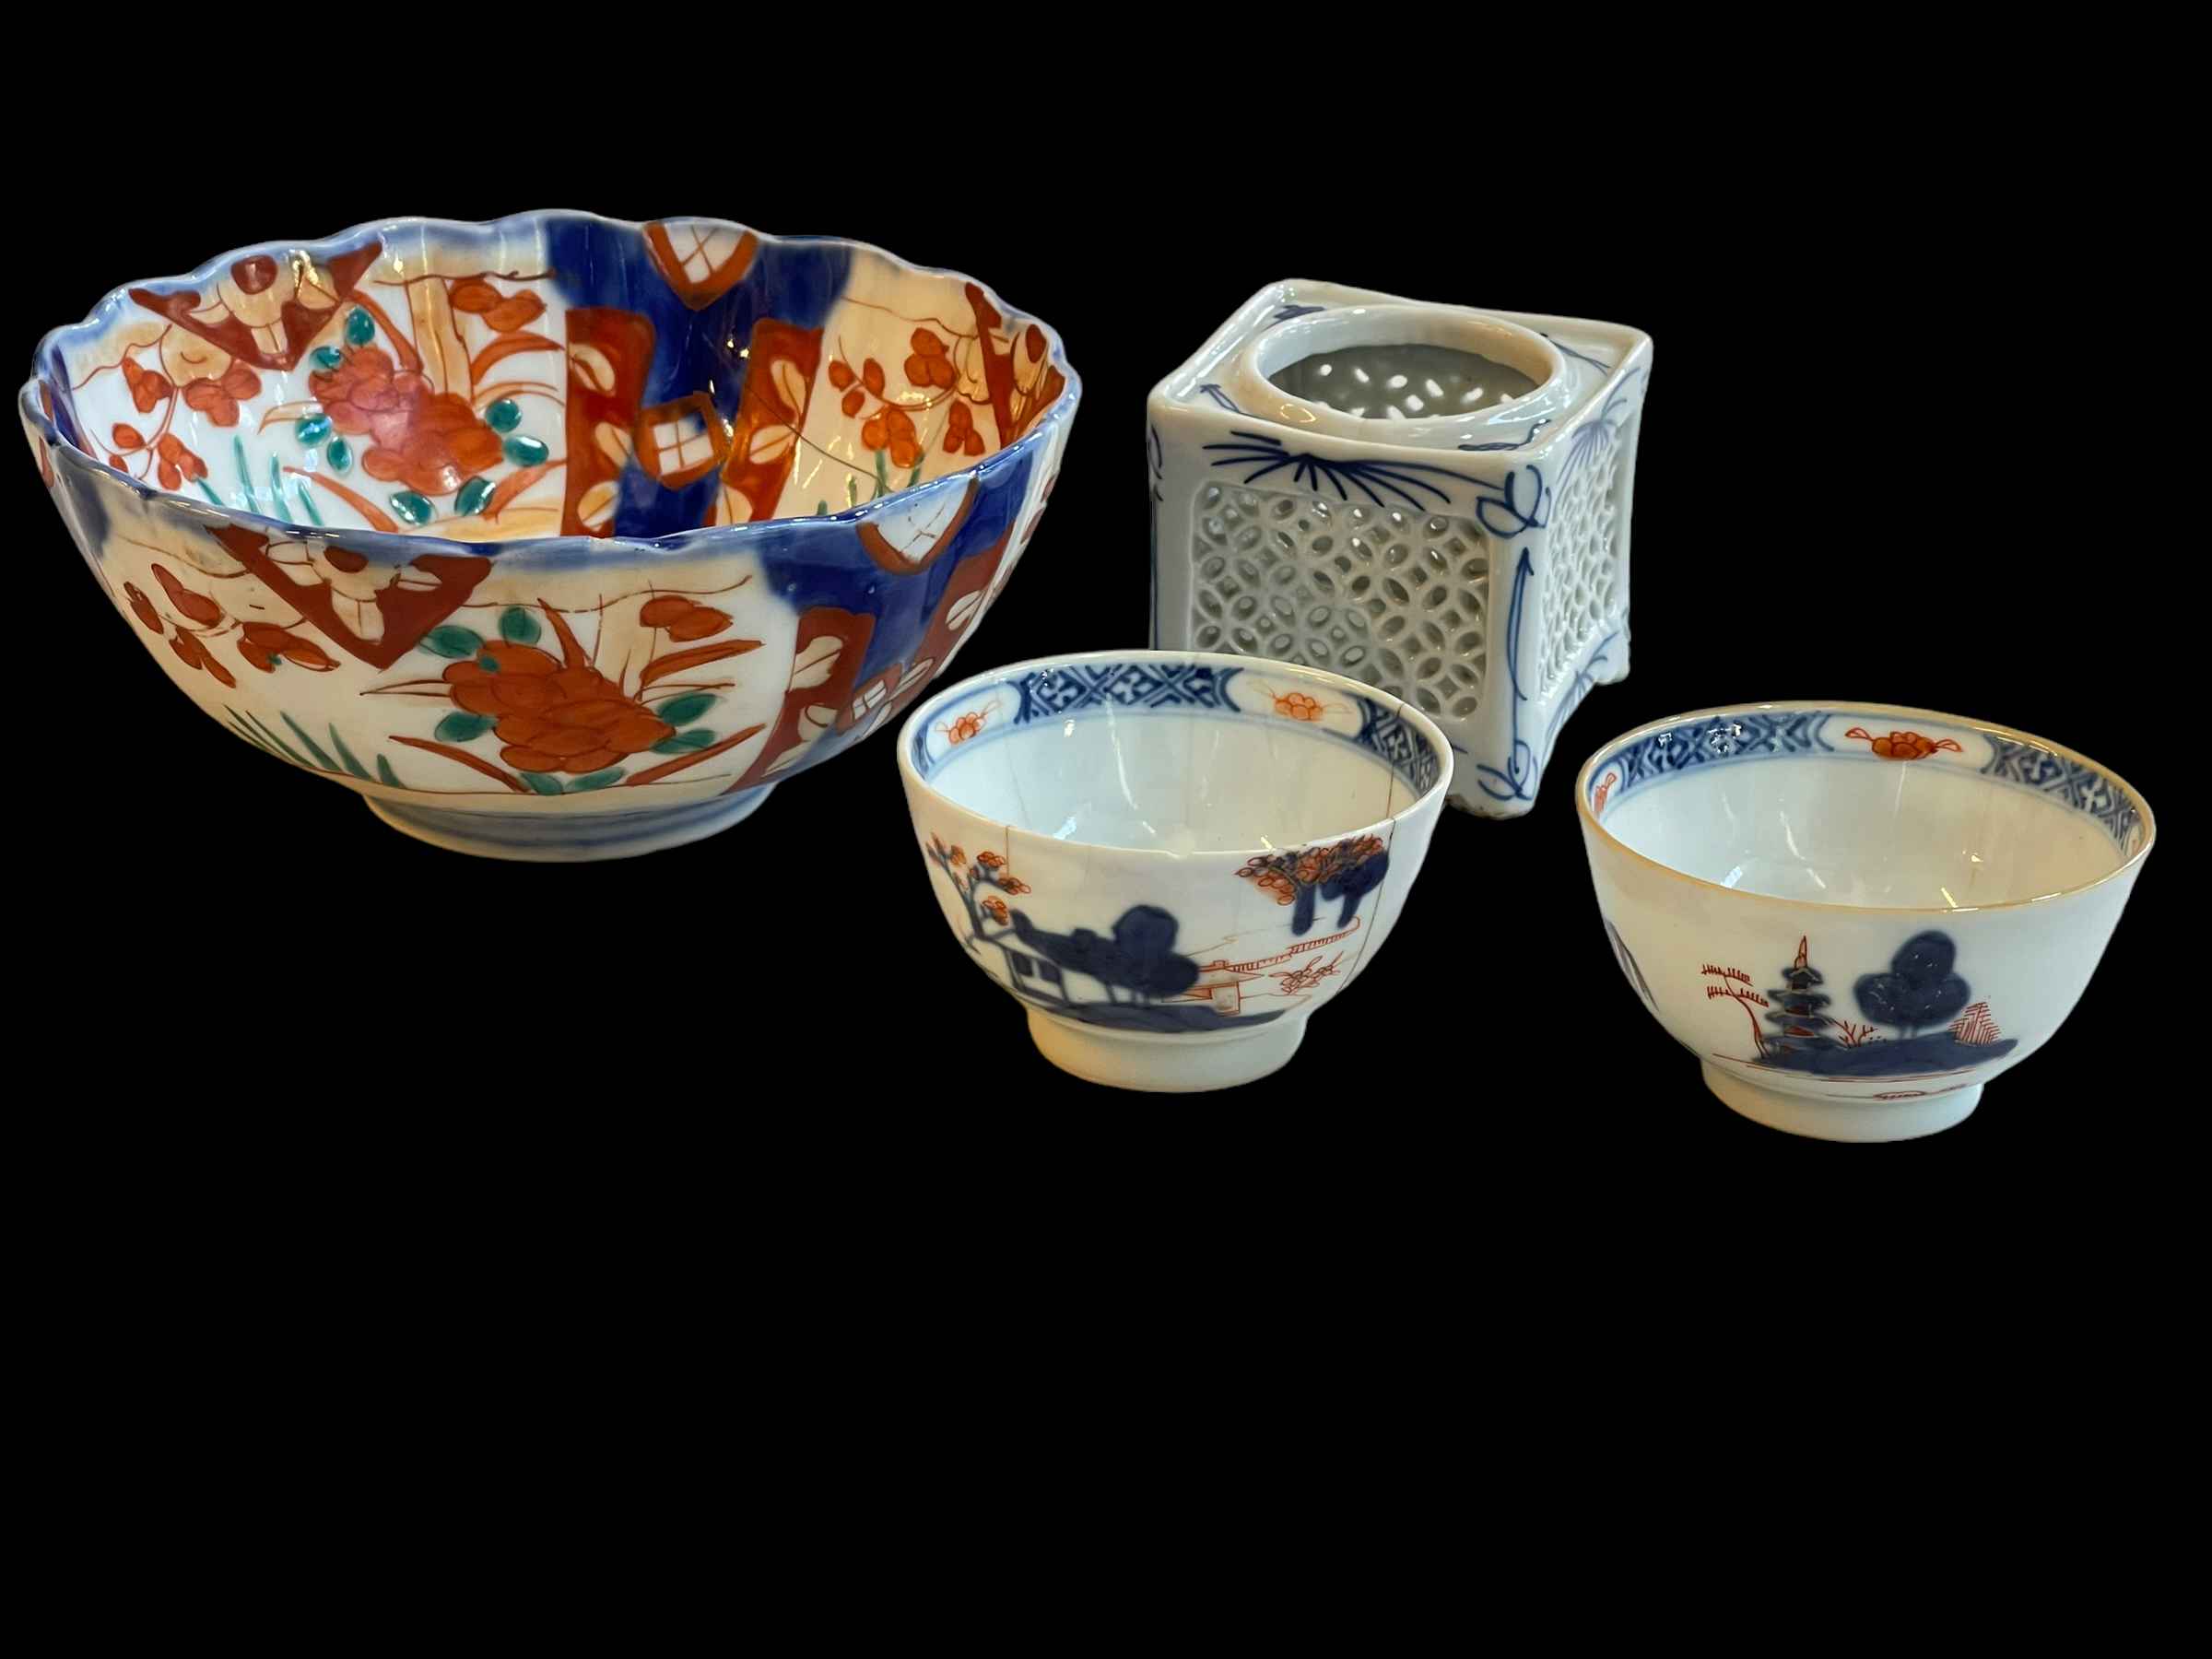 Pair of Chinese 18th Century tea bowls, Imari bowl and pierced porcelain pot. - Image 2 of 2